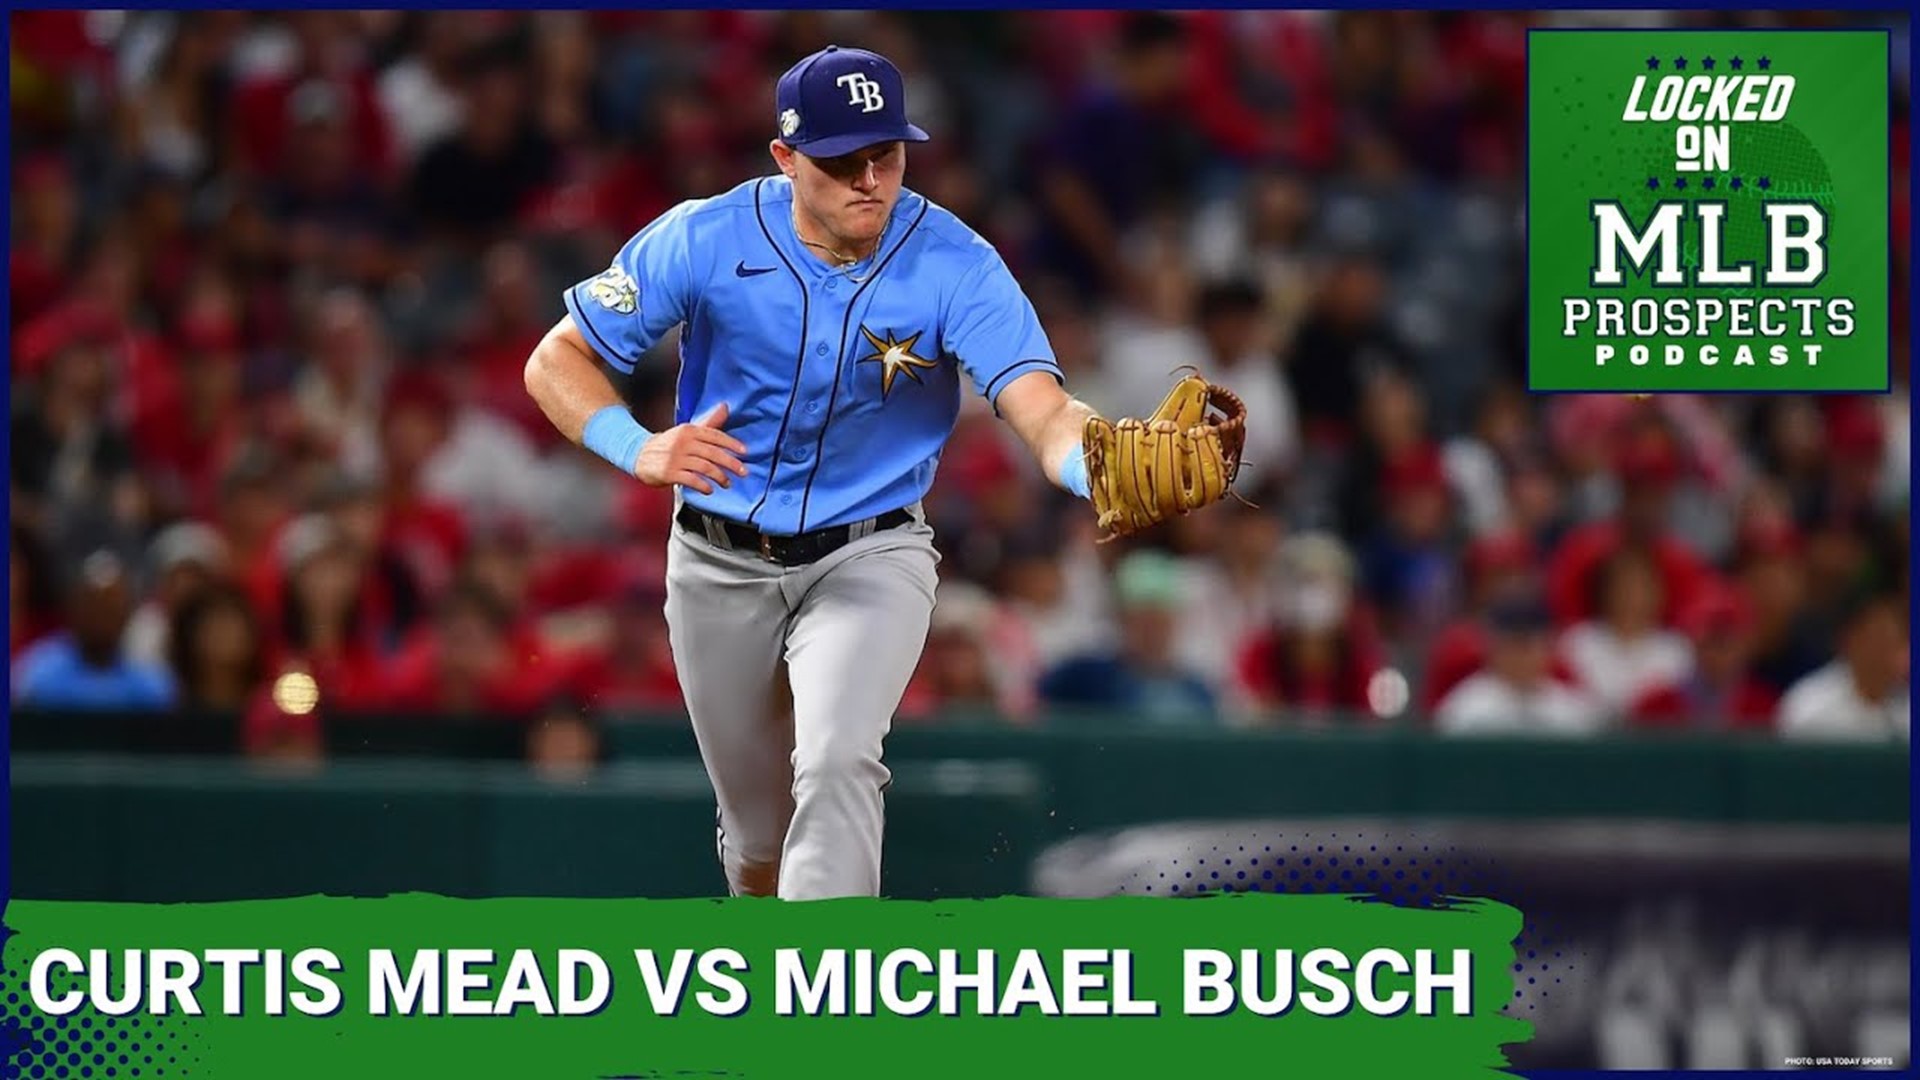 Join host Lindsay Crosby (he/him) on this special mailbag episode of Locked On MLB Prospects! In the first segment, Lindsay delves into an exciting prospect showdown